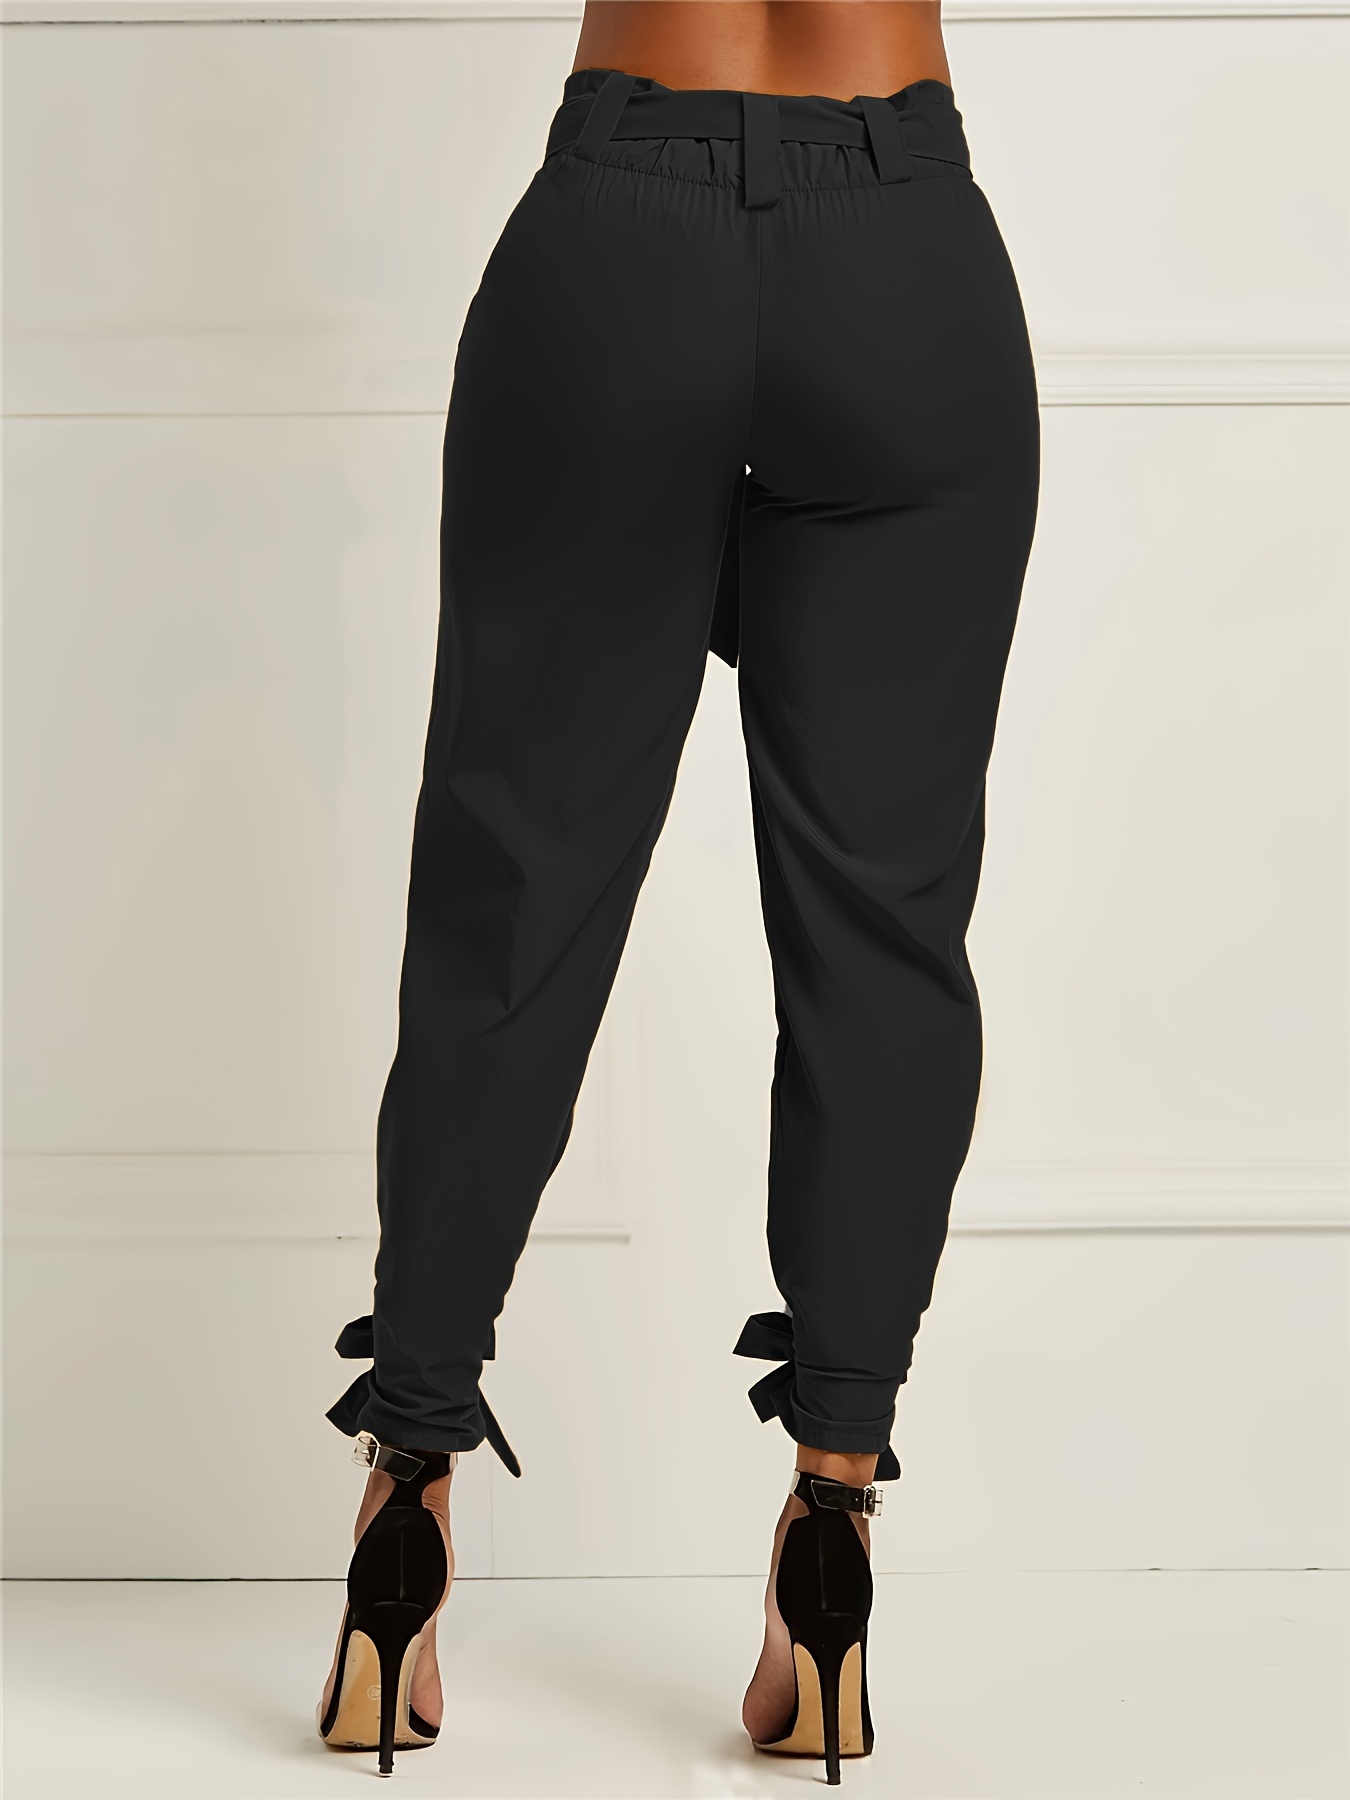 Fashion （black）Womens Hyper Stretchy Pants Pencil Pull-On Casual